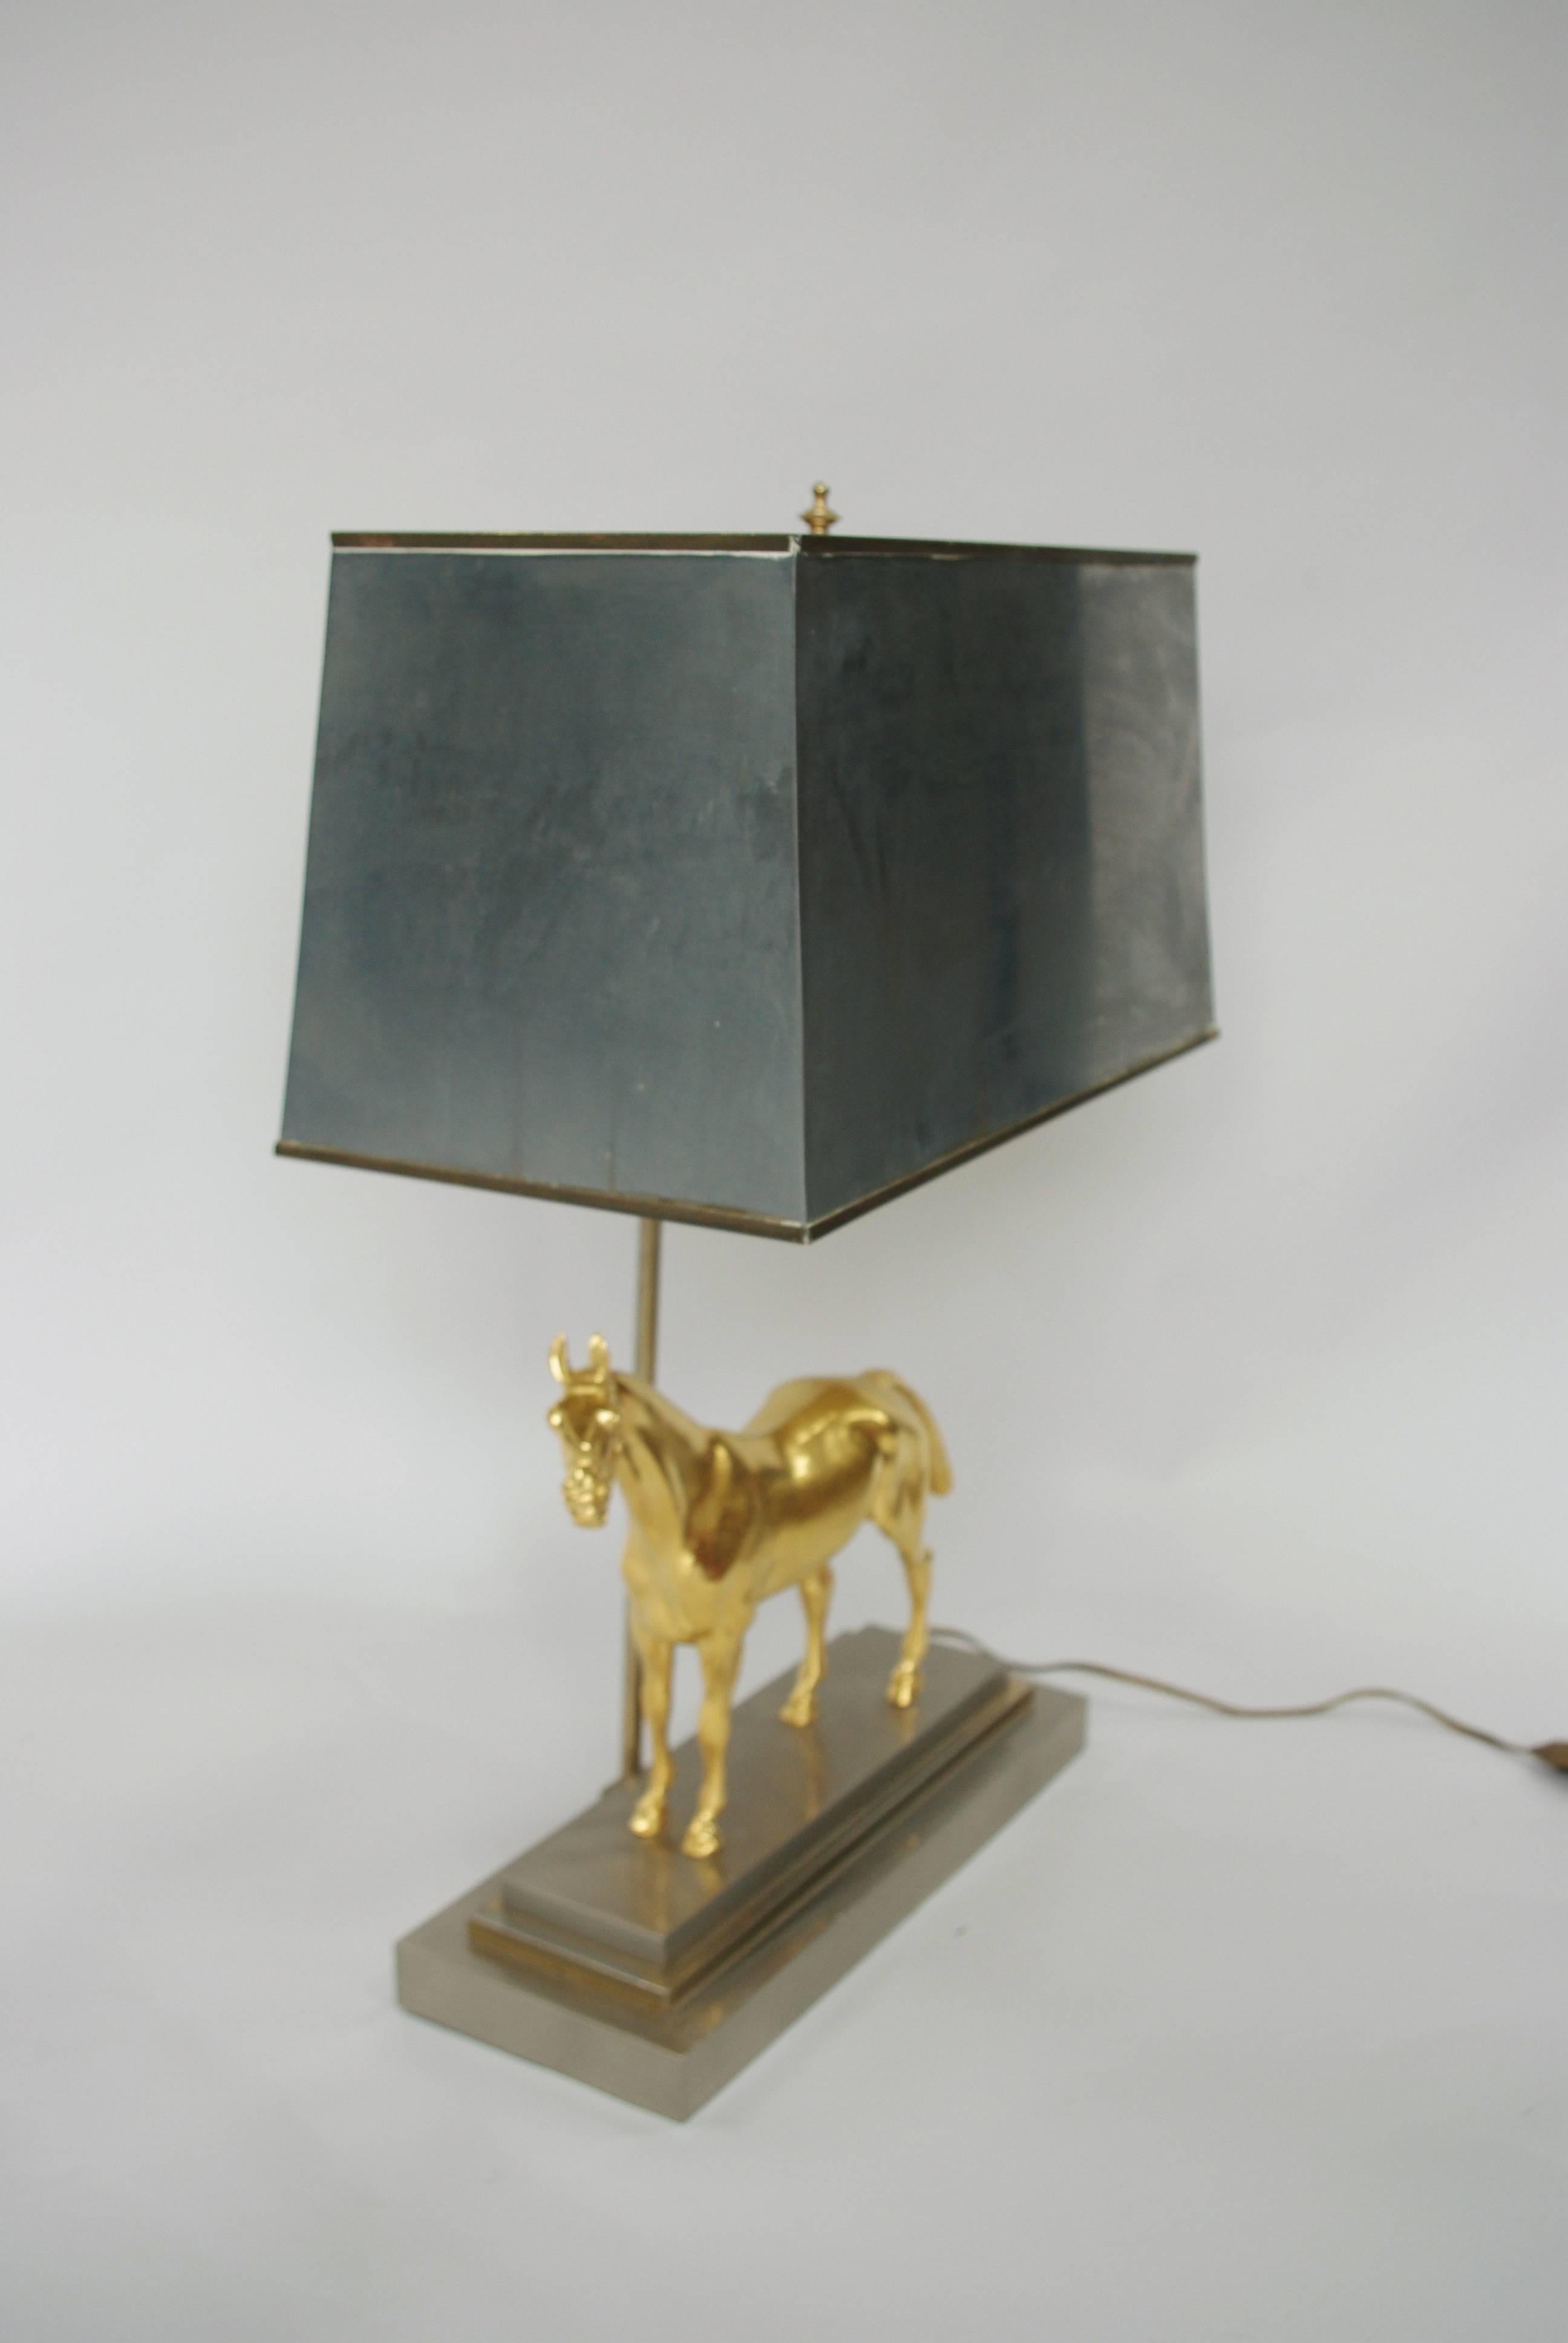 Made for electricity 
Gilded and silver bronze 
In the style of Maison Jansen 
1960s work.

 